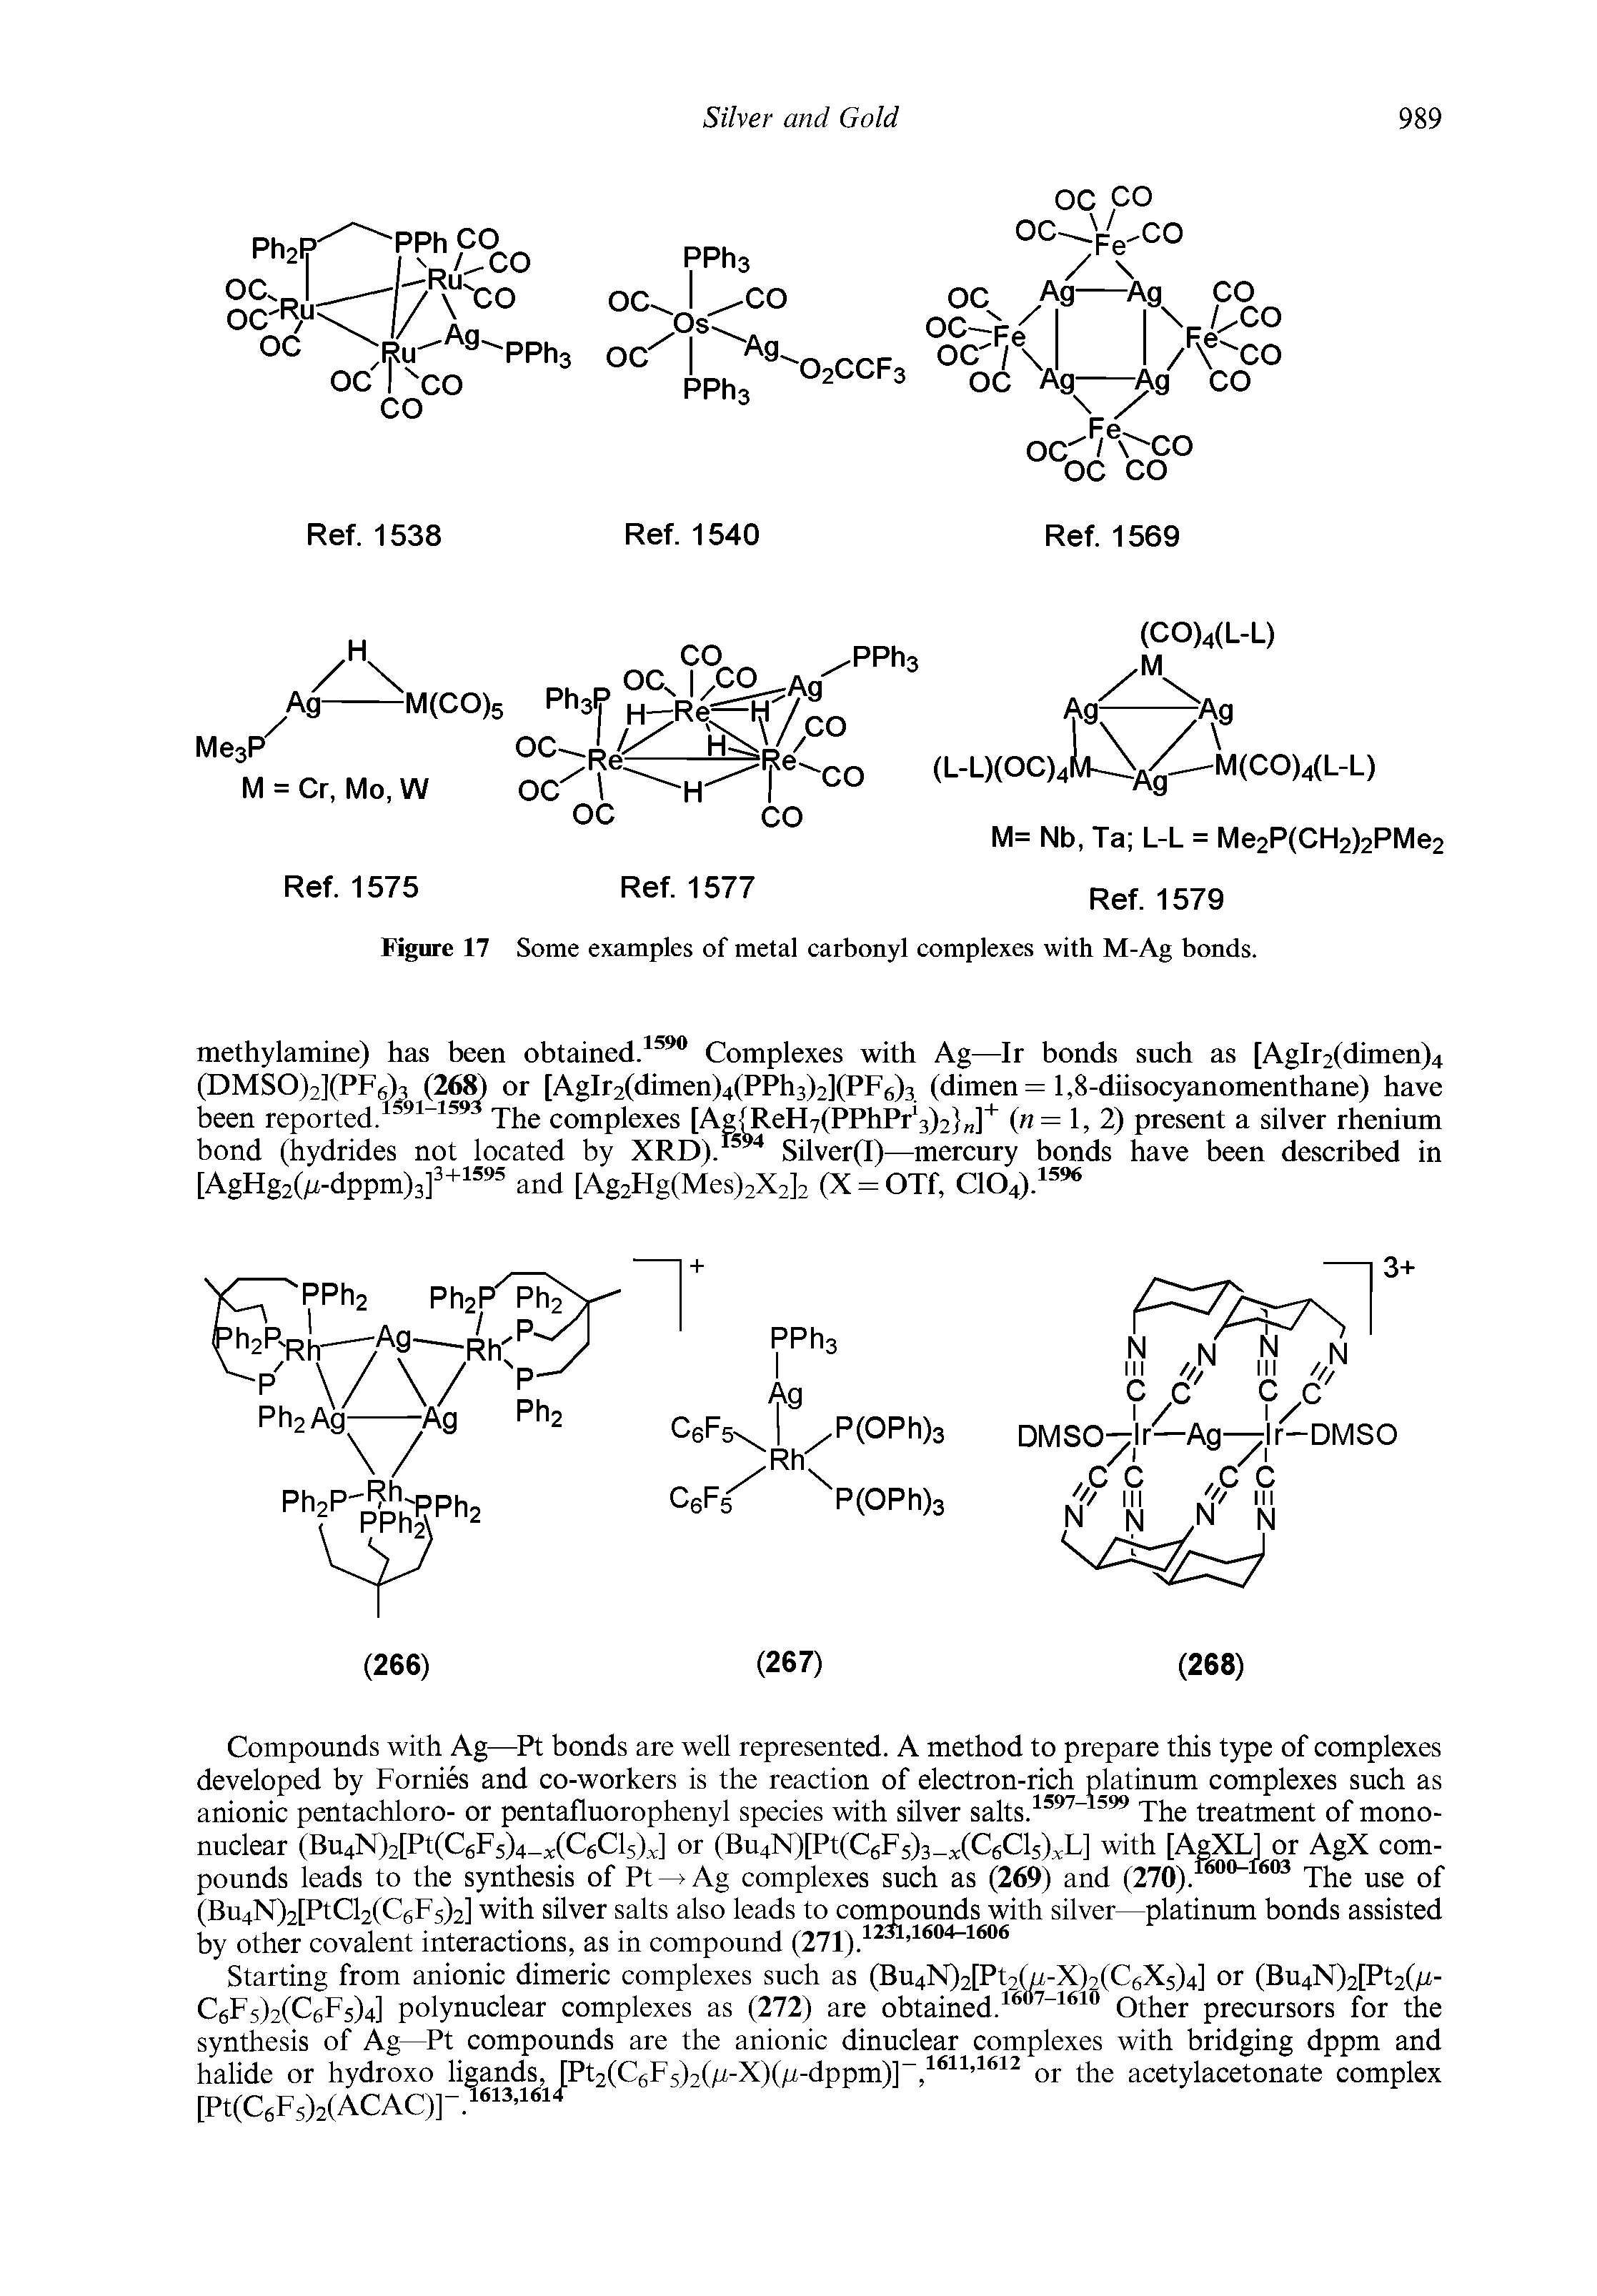 Figure 17 Some examples of metal carbonyl complexes with M-Ag bonds.